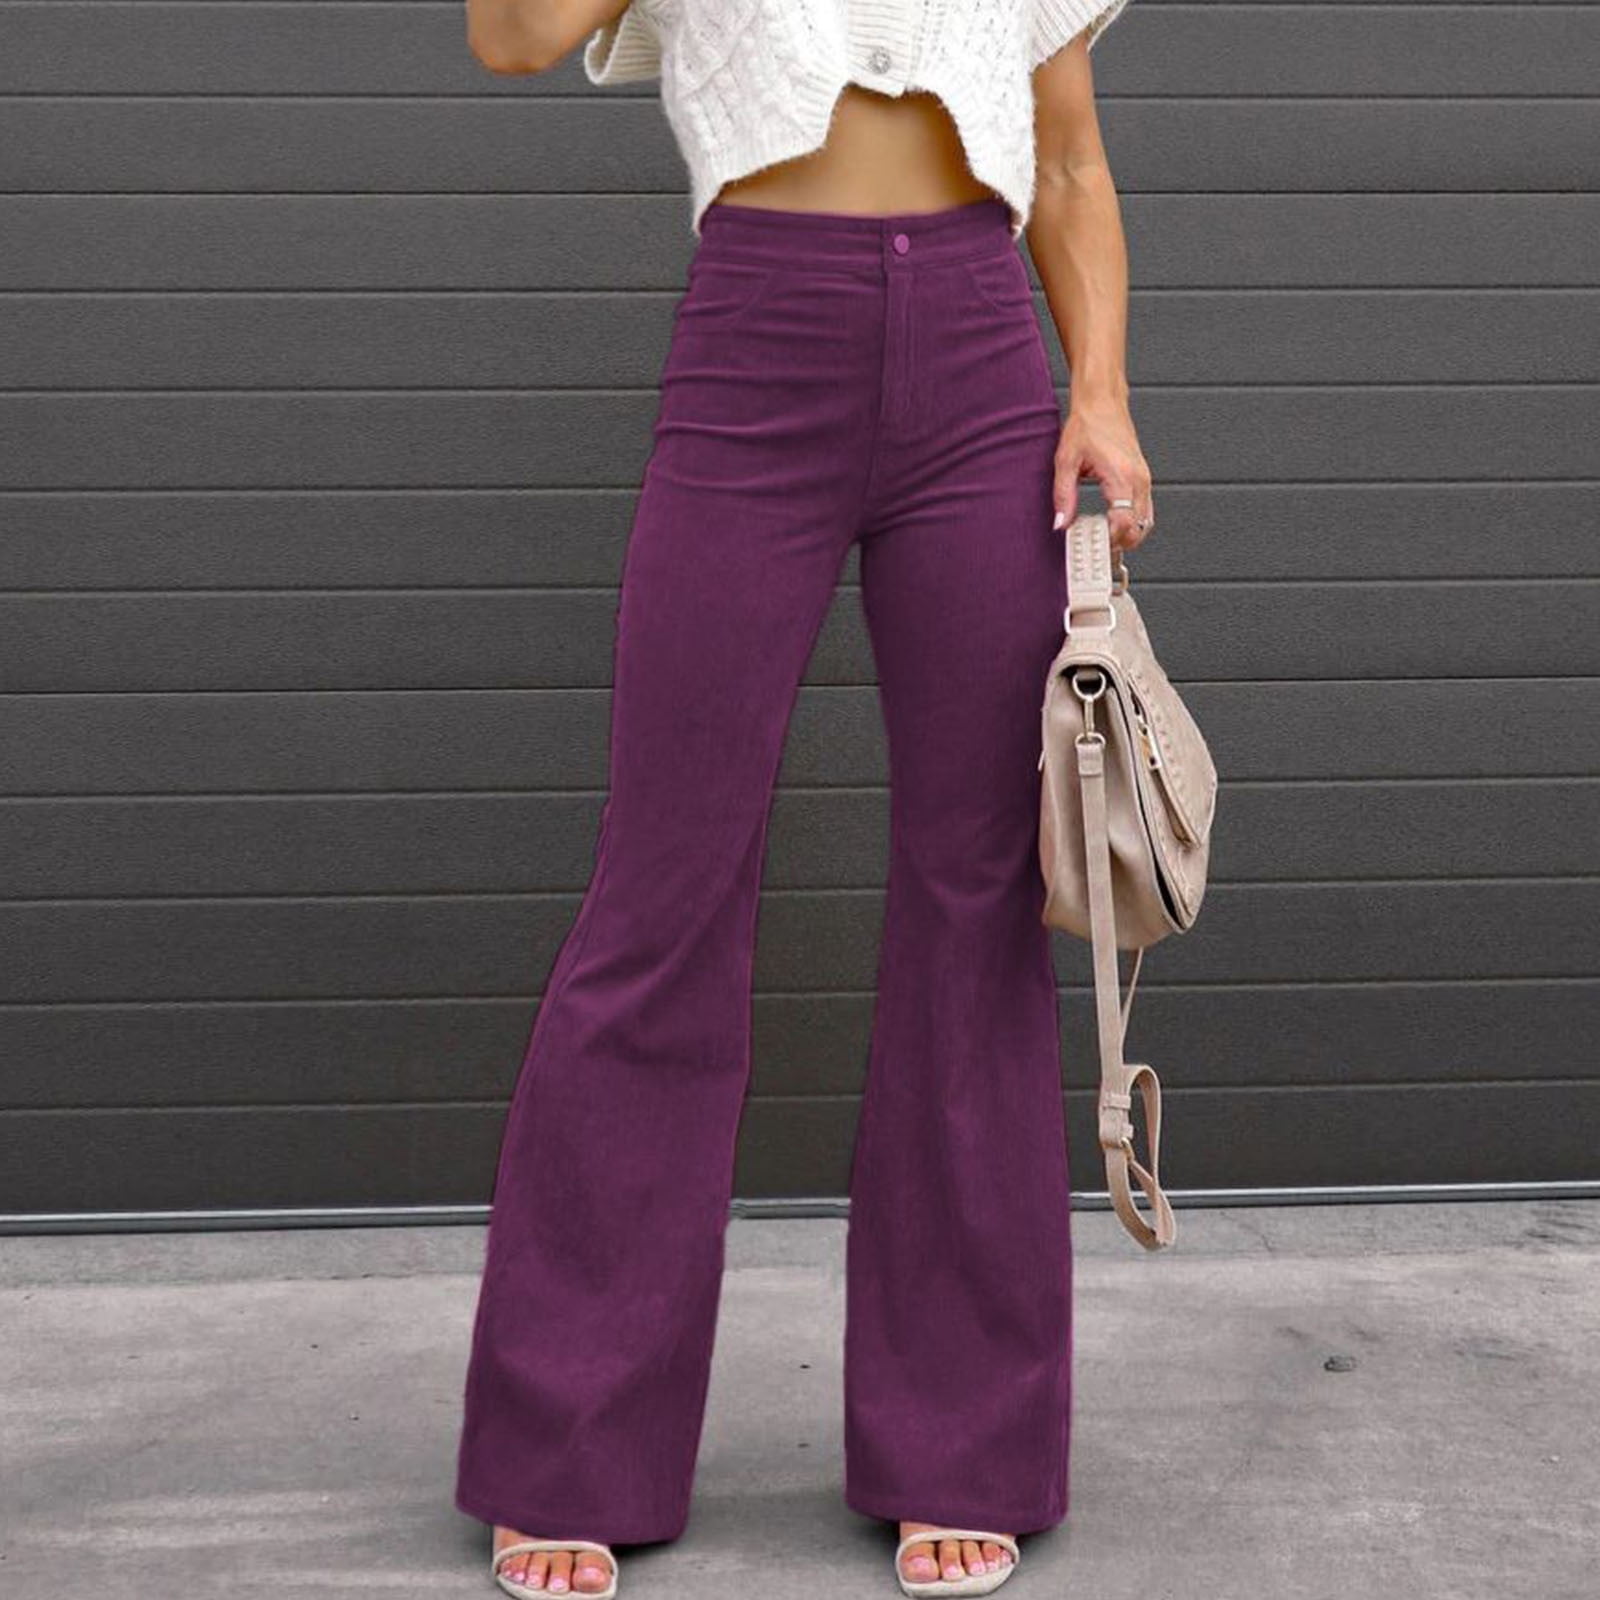 Plus Size Flare Leg Pants for Women High Waist Slim-Fit Bell Bottom Pant  Winter Solid Color Lounge Ankle Trousers with Pockets 